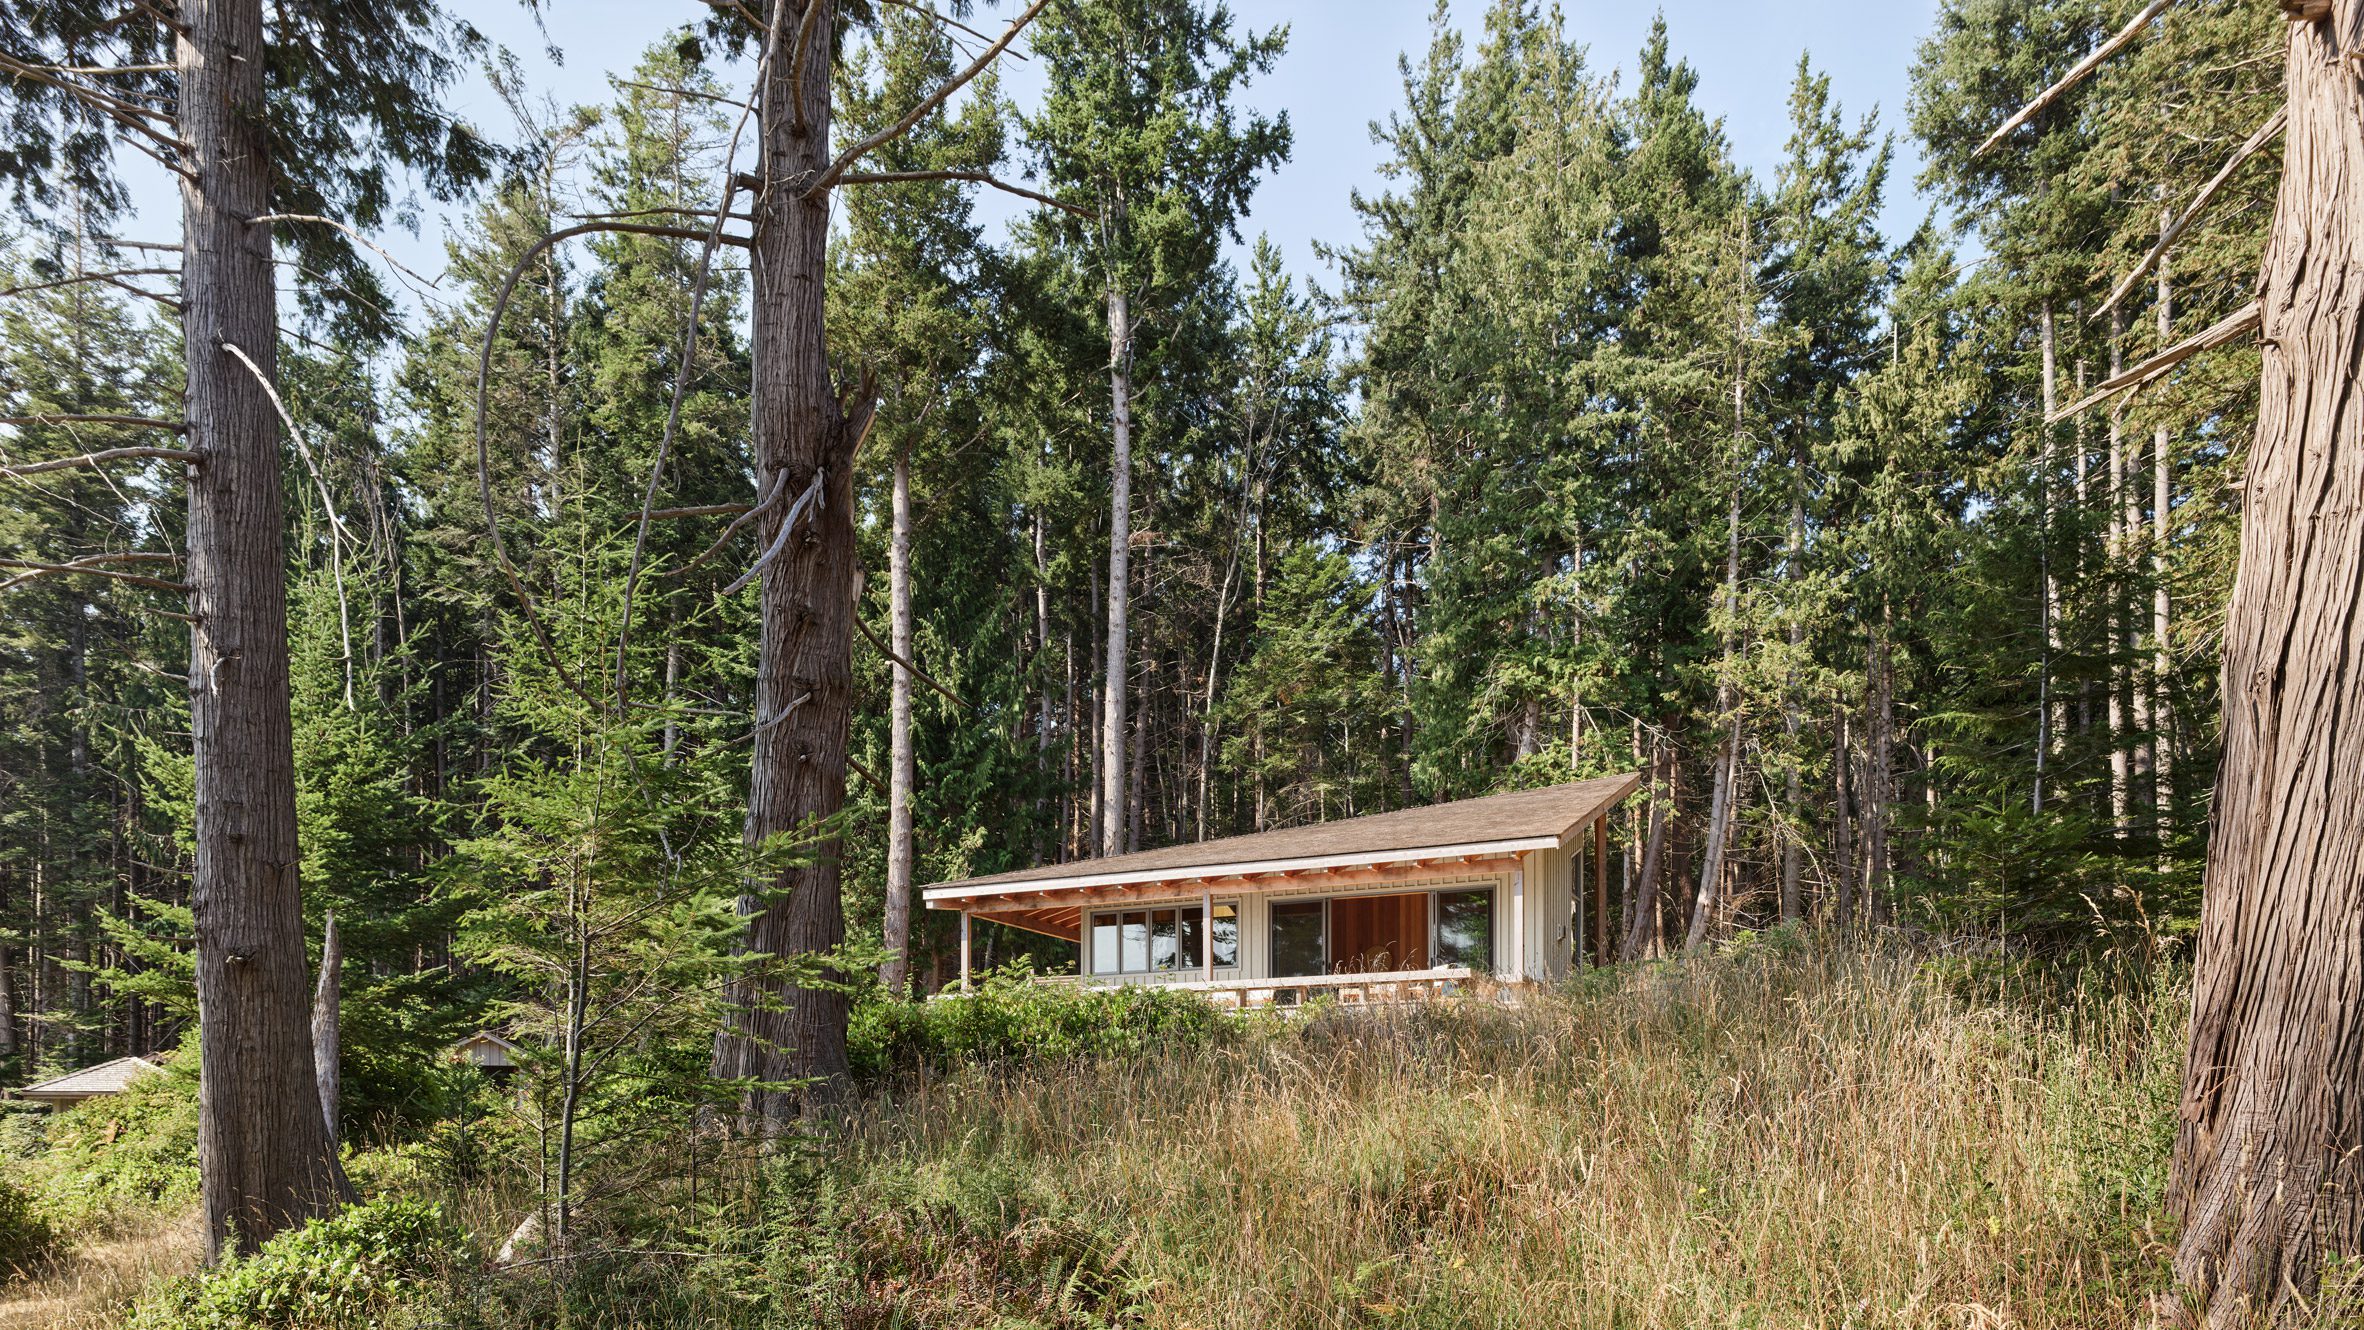 A cabin on a hill surrounded be trees